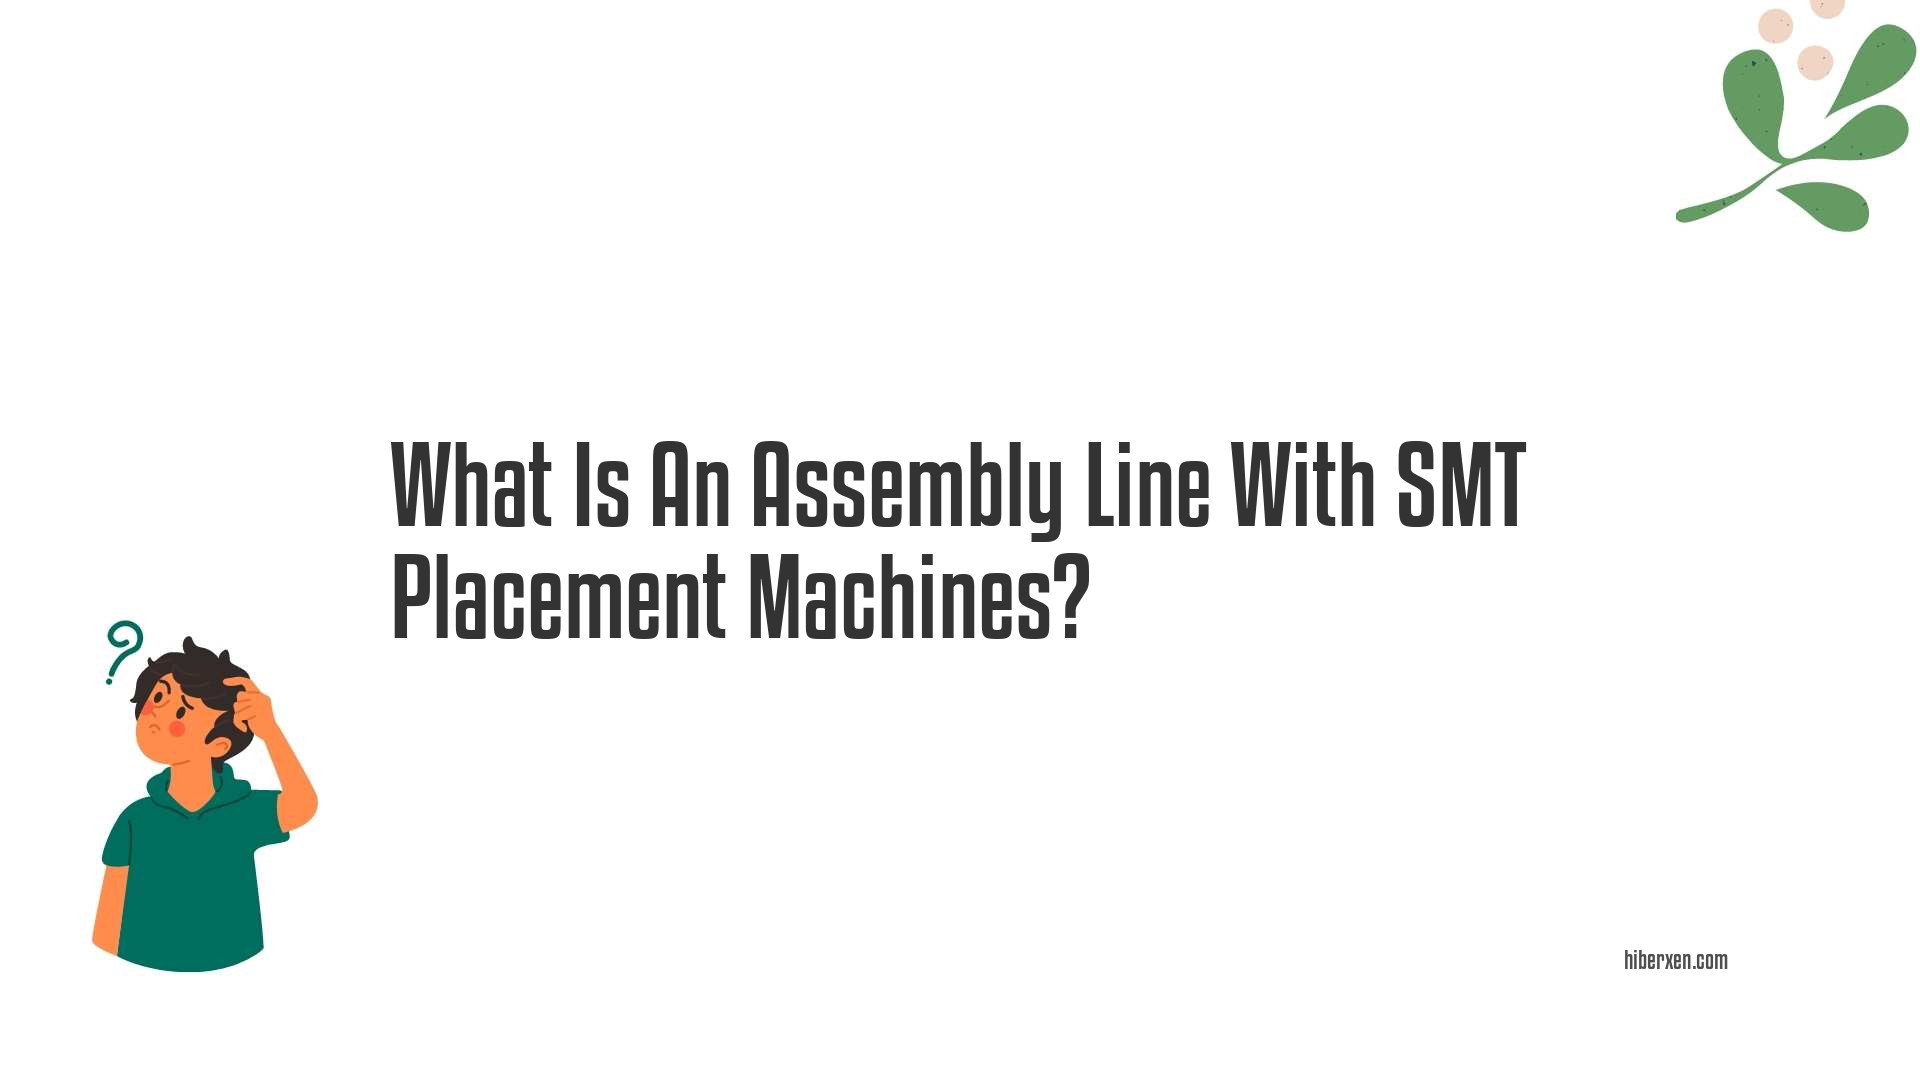 What Is An Assembly Line With SMT Placement Machines?